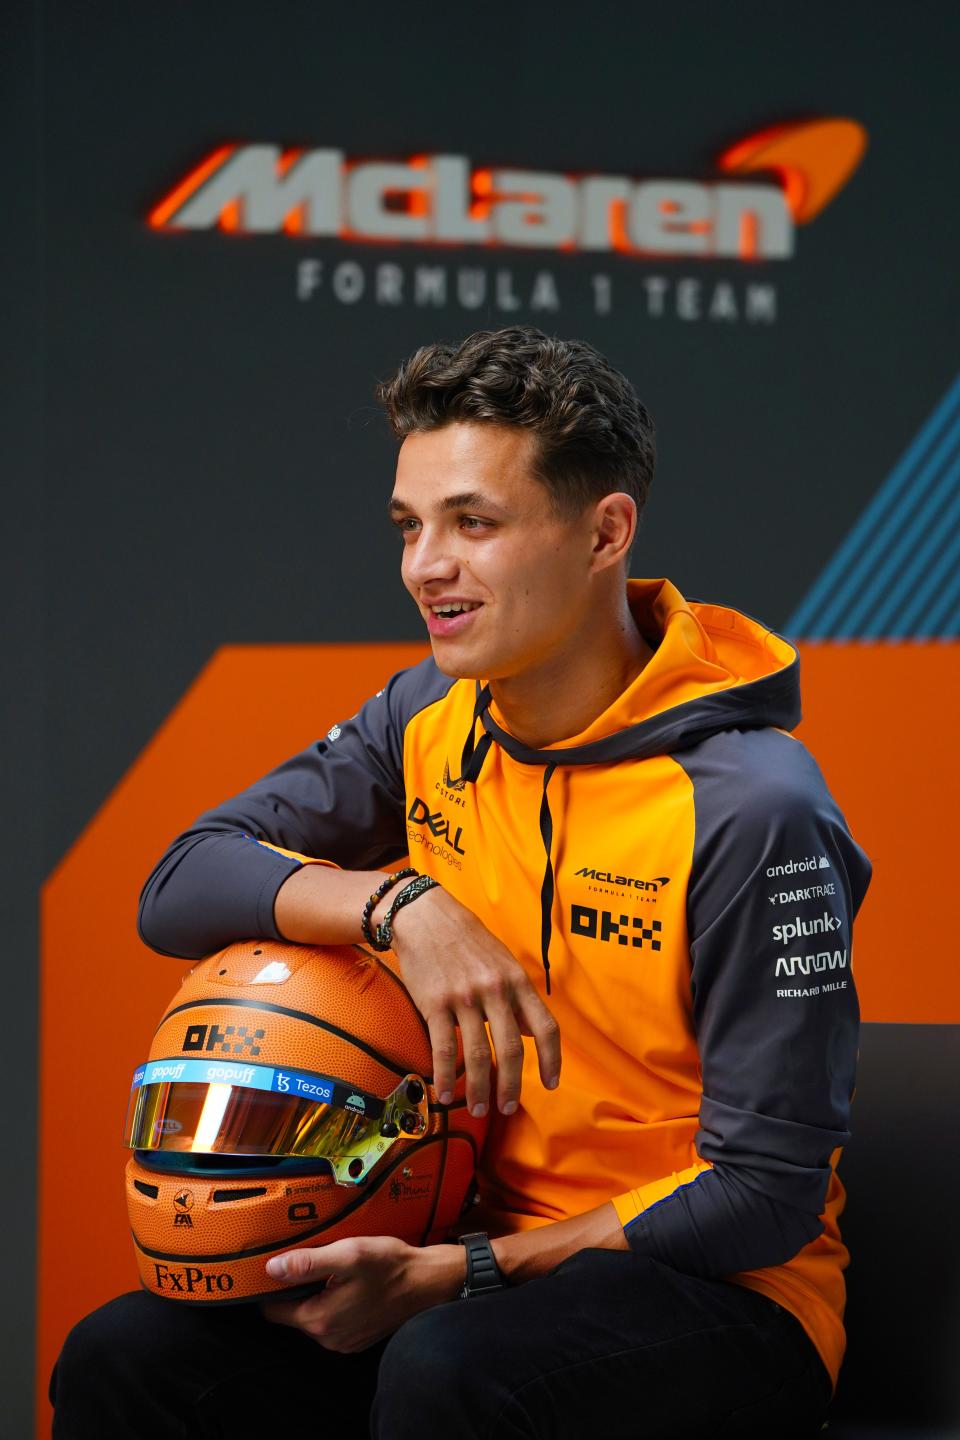 May 5, 2022; Miami Gardens, Florida, USA; McLaren driver Lando Norris of Britain talks with a reporter during an interview during preparations for the Miami Grand Prix at Miami International Autodrome. Mandatory Credit: John David Mercer-USA TODAY Sports